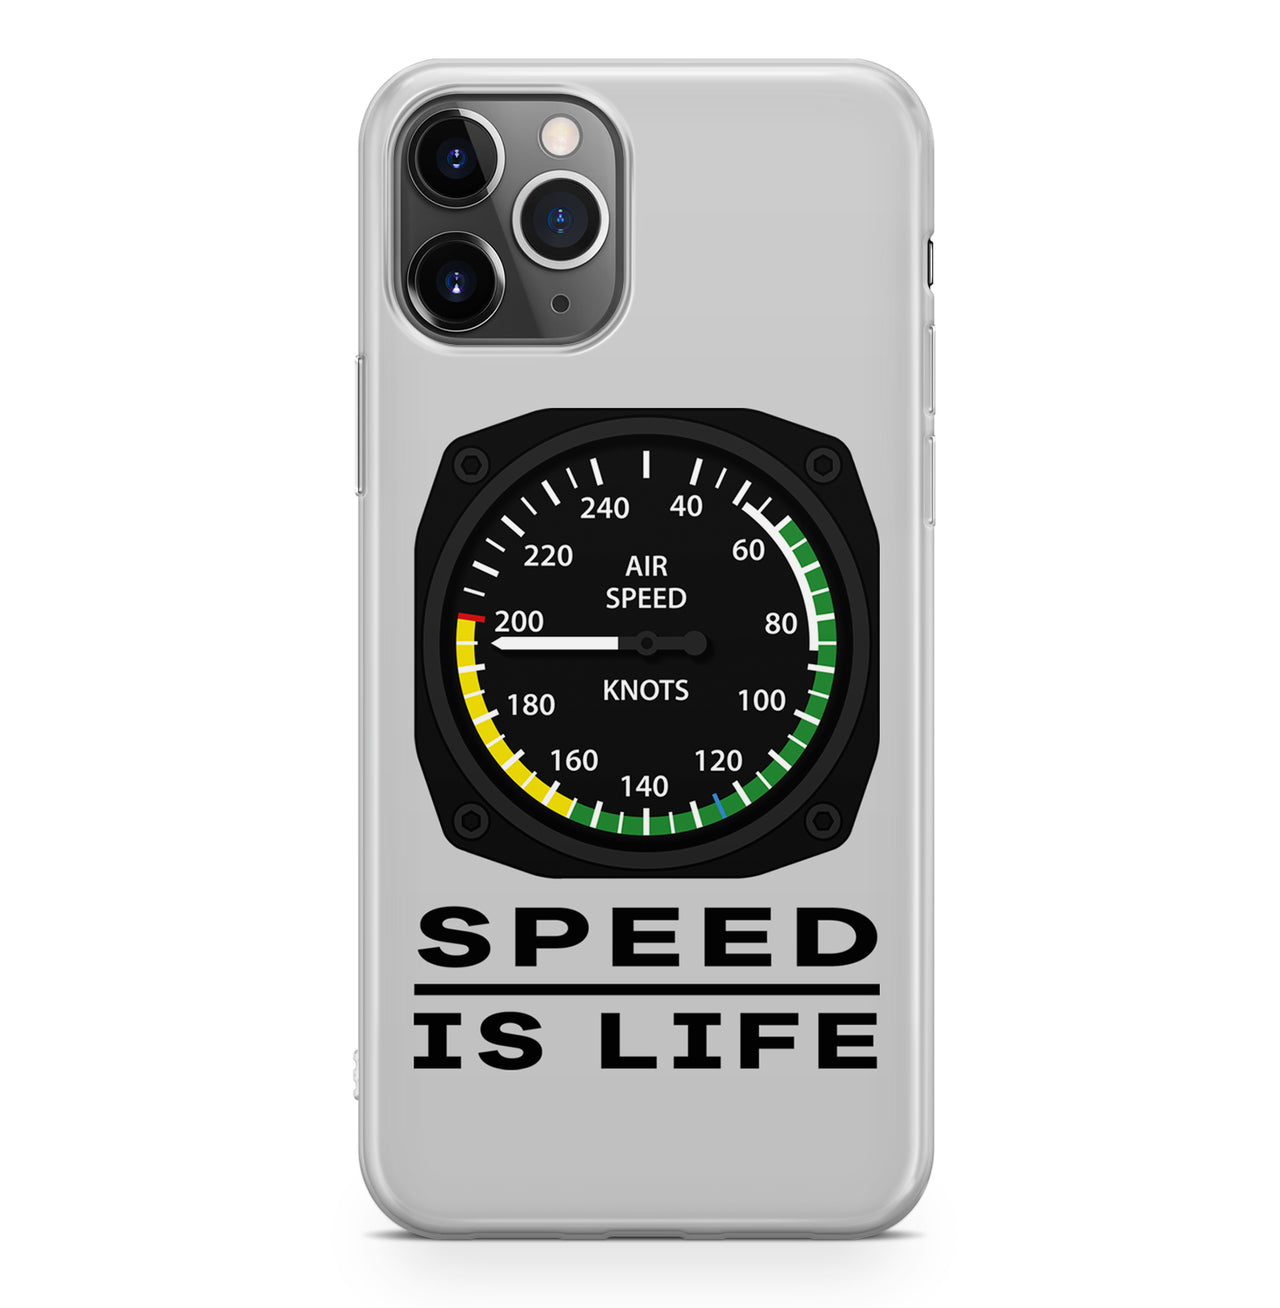 Speed Is Life Designed iPhone Cases